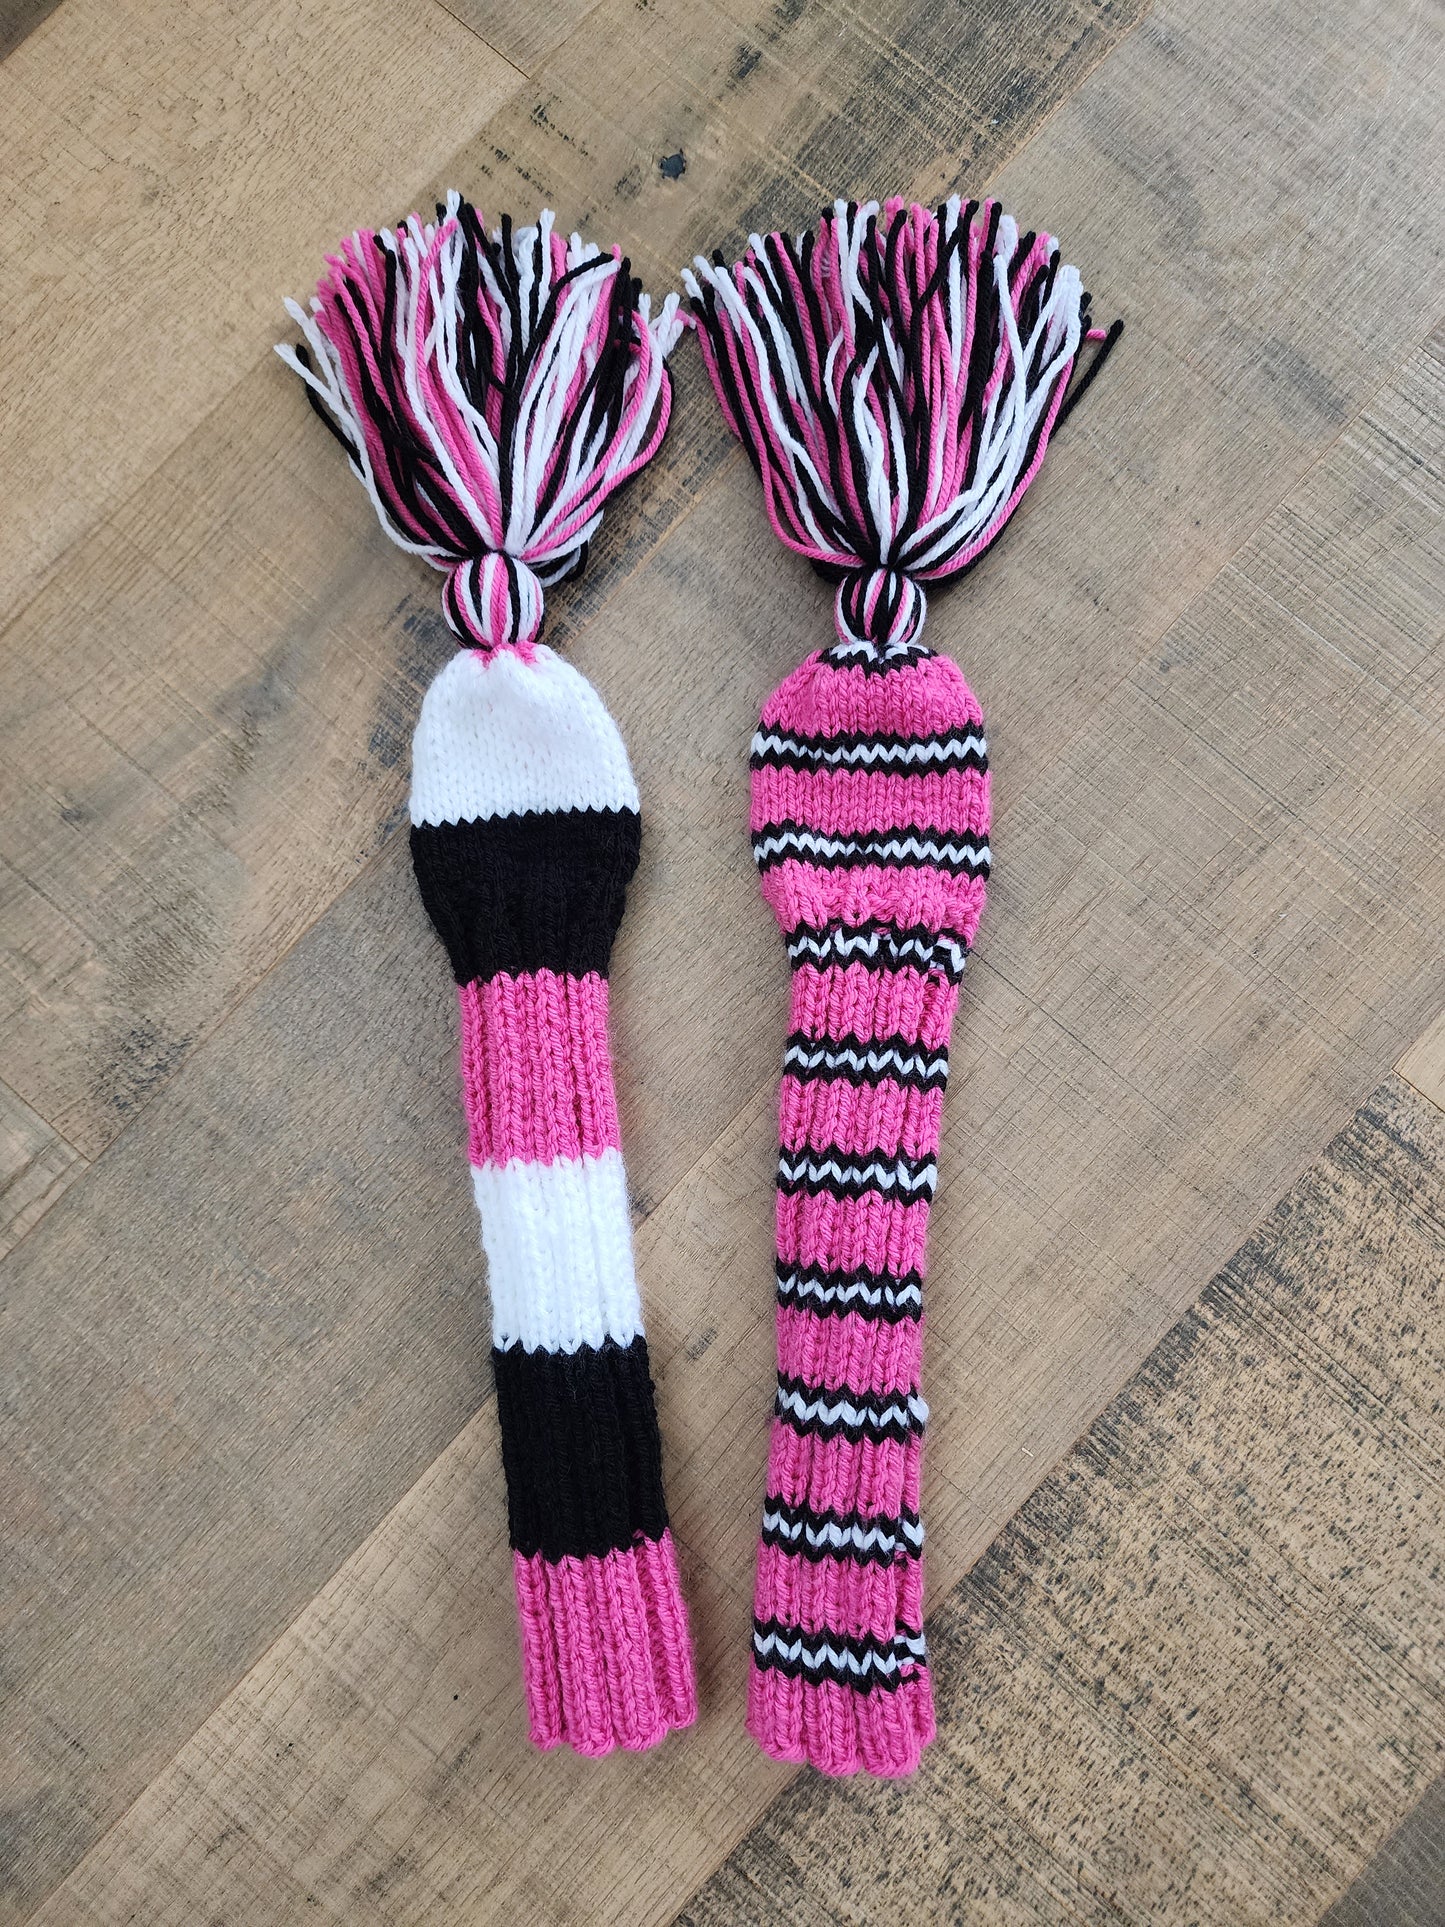 Two Hand Knit Golf Club Head Covers Retro-Vintage Black, Pink & White with Tassels for Fairway Woods - Austinknittylimits